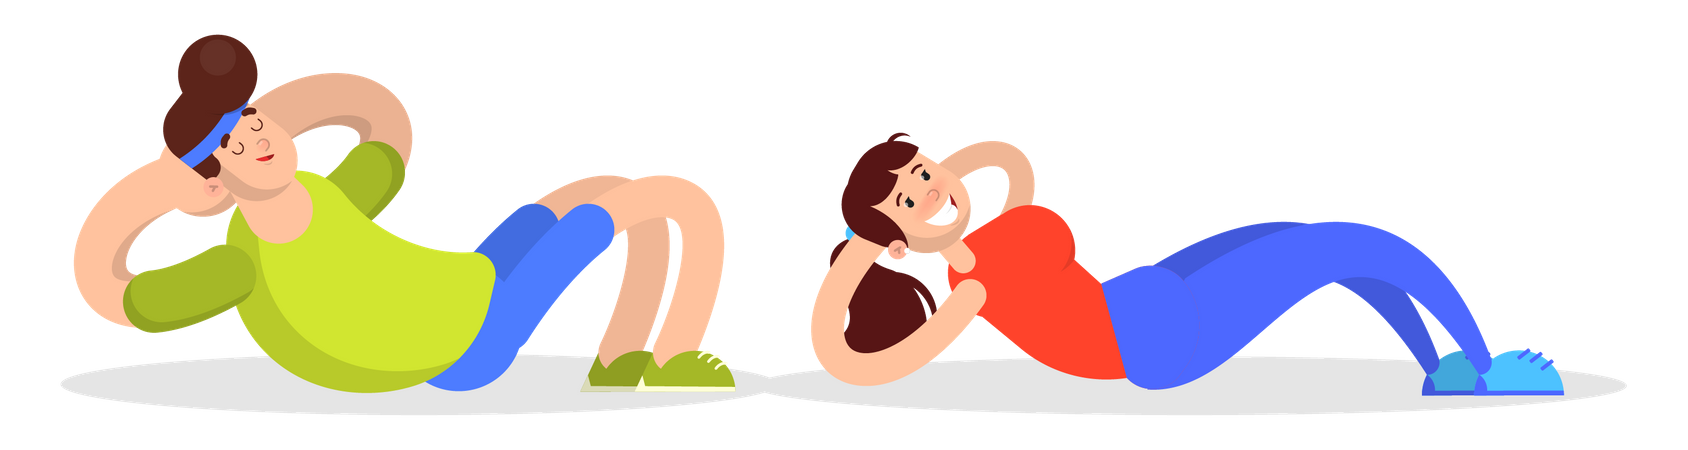 Woman and man doing abs exercise  Illustration